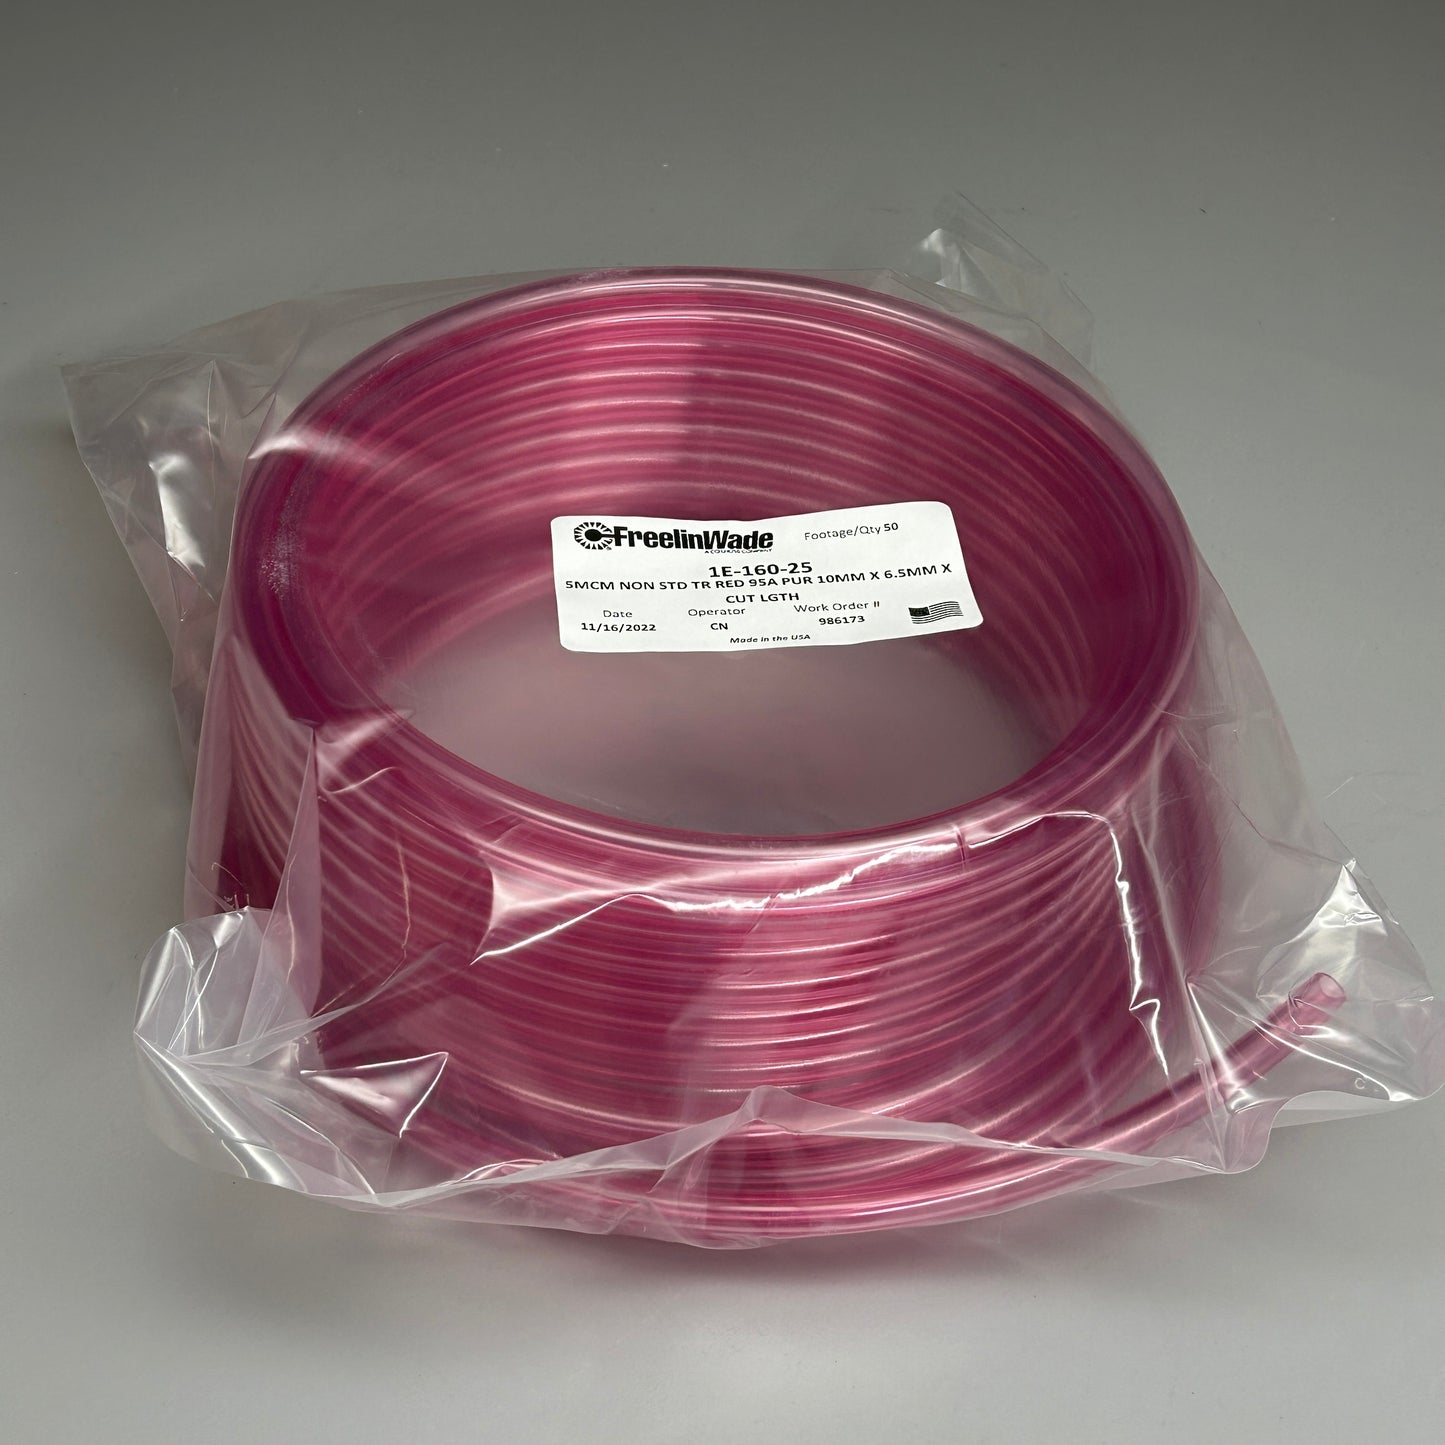 FREELIN-WADE Tubing 50 ft Transparent Red 1E-160-25 (New)